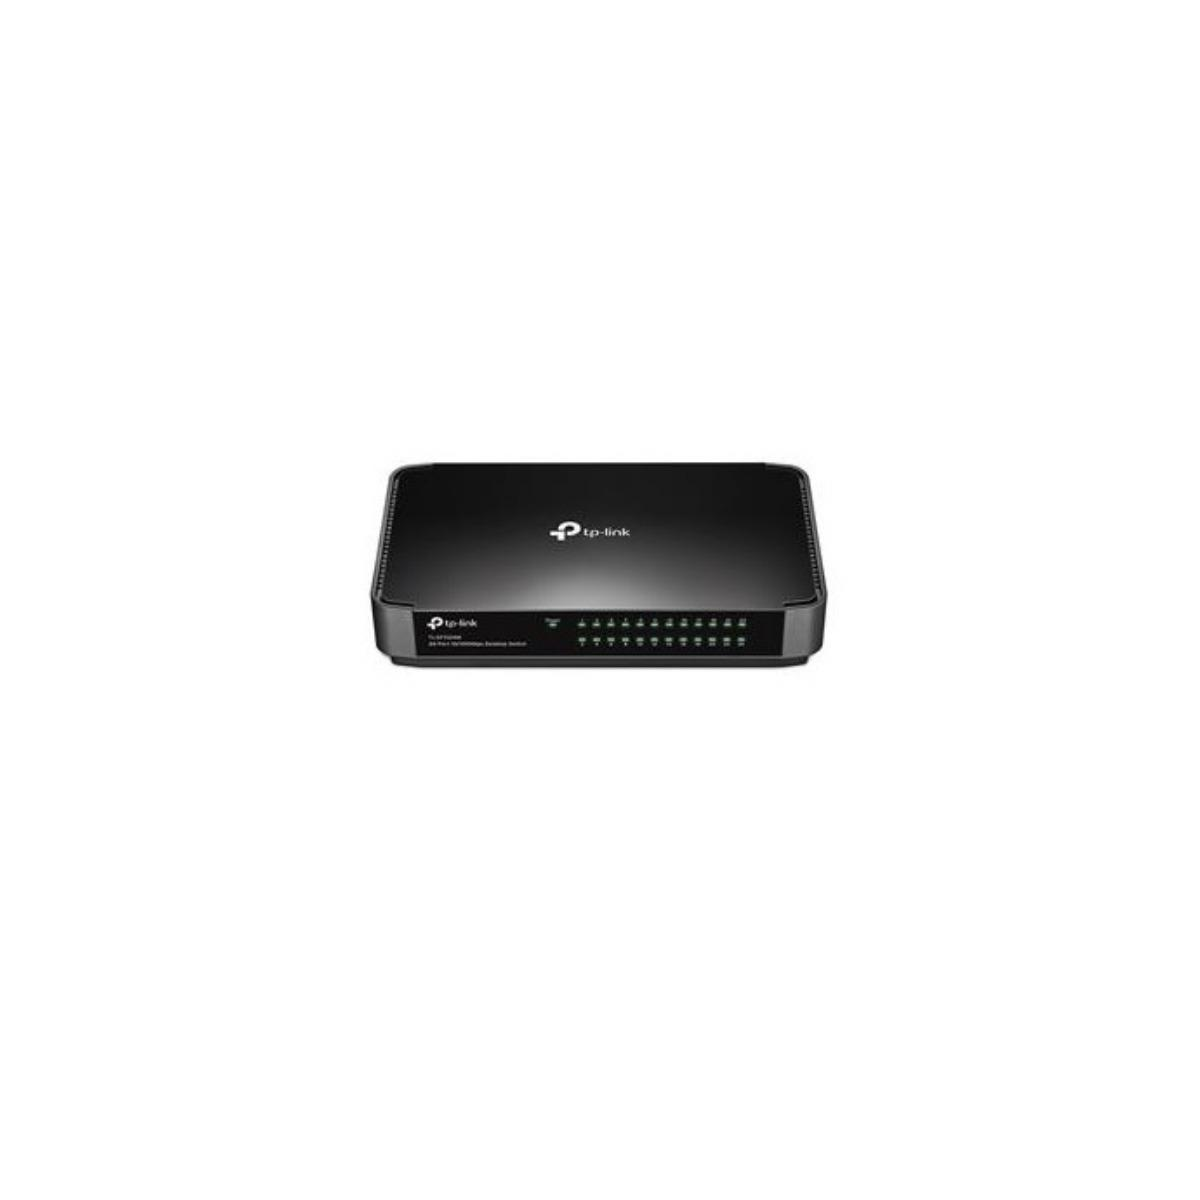 TP-LINK Switch TL-SF1024M 24